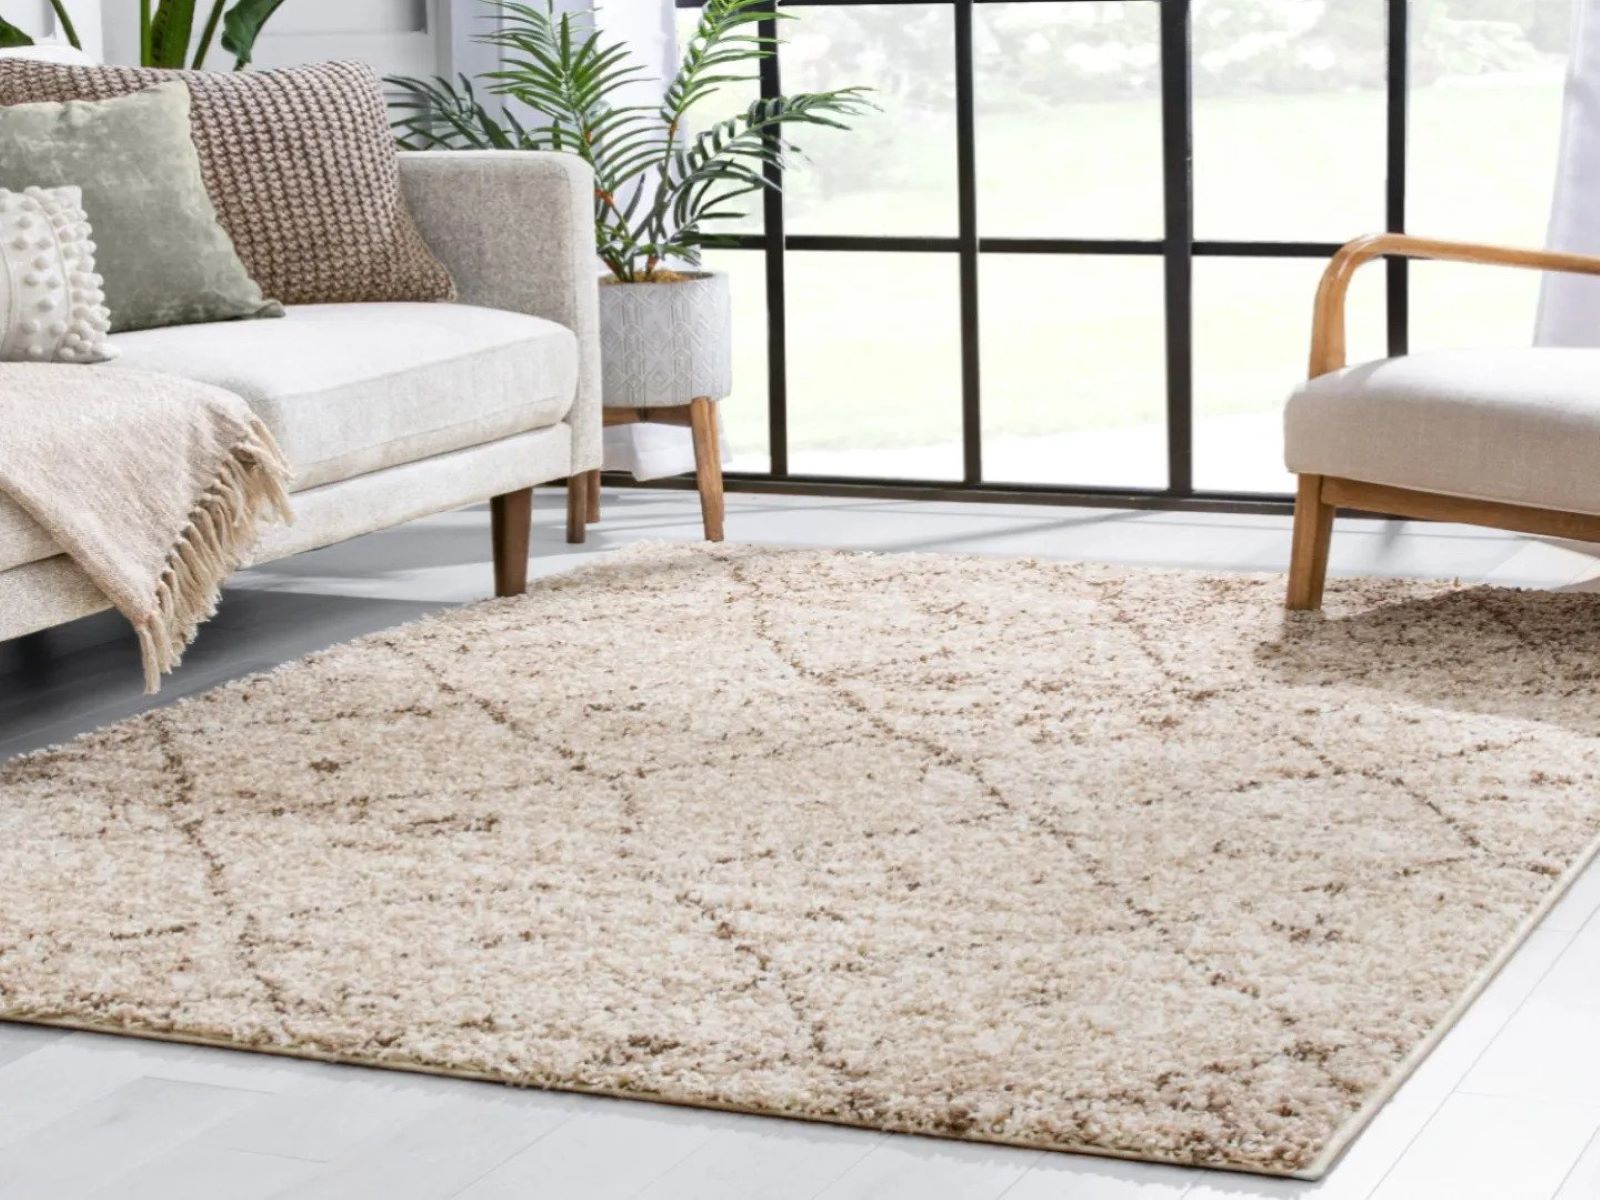 What Is The Best Brand Of Washable Rugs?